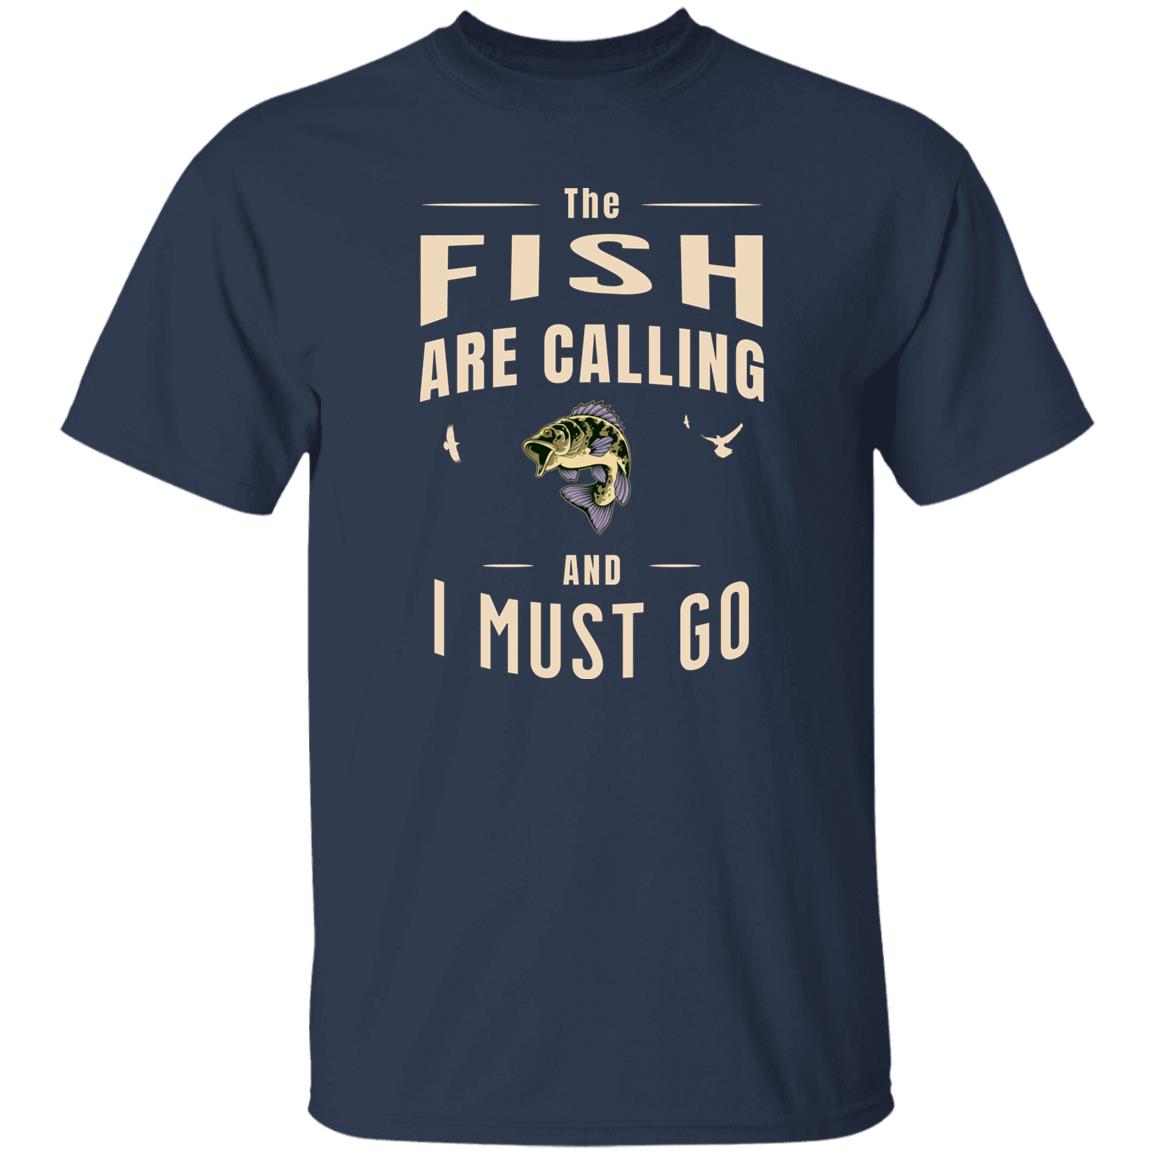 The fish are calling and i must go k t-shirt navy